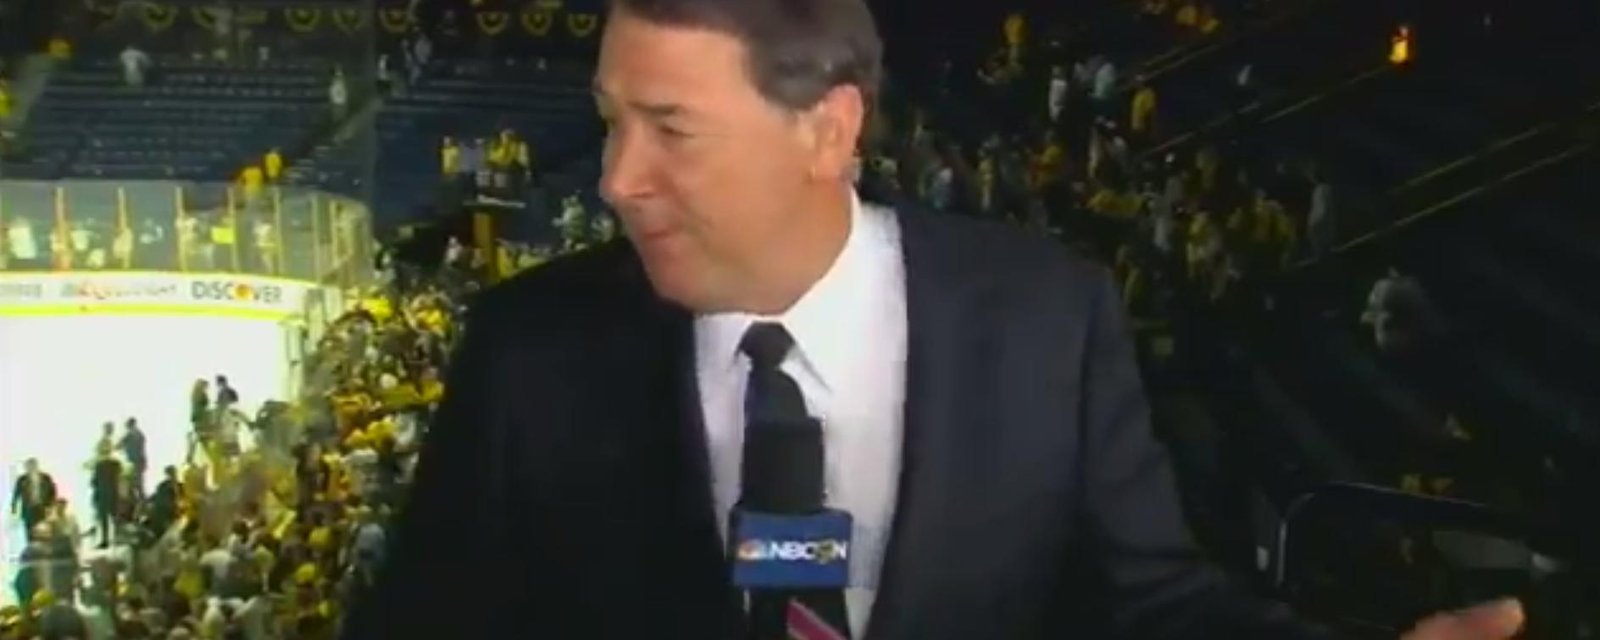 Must see : Mike Milbury being berated live on air! 